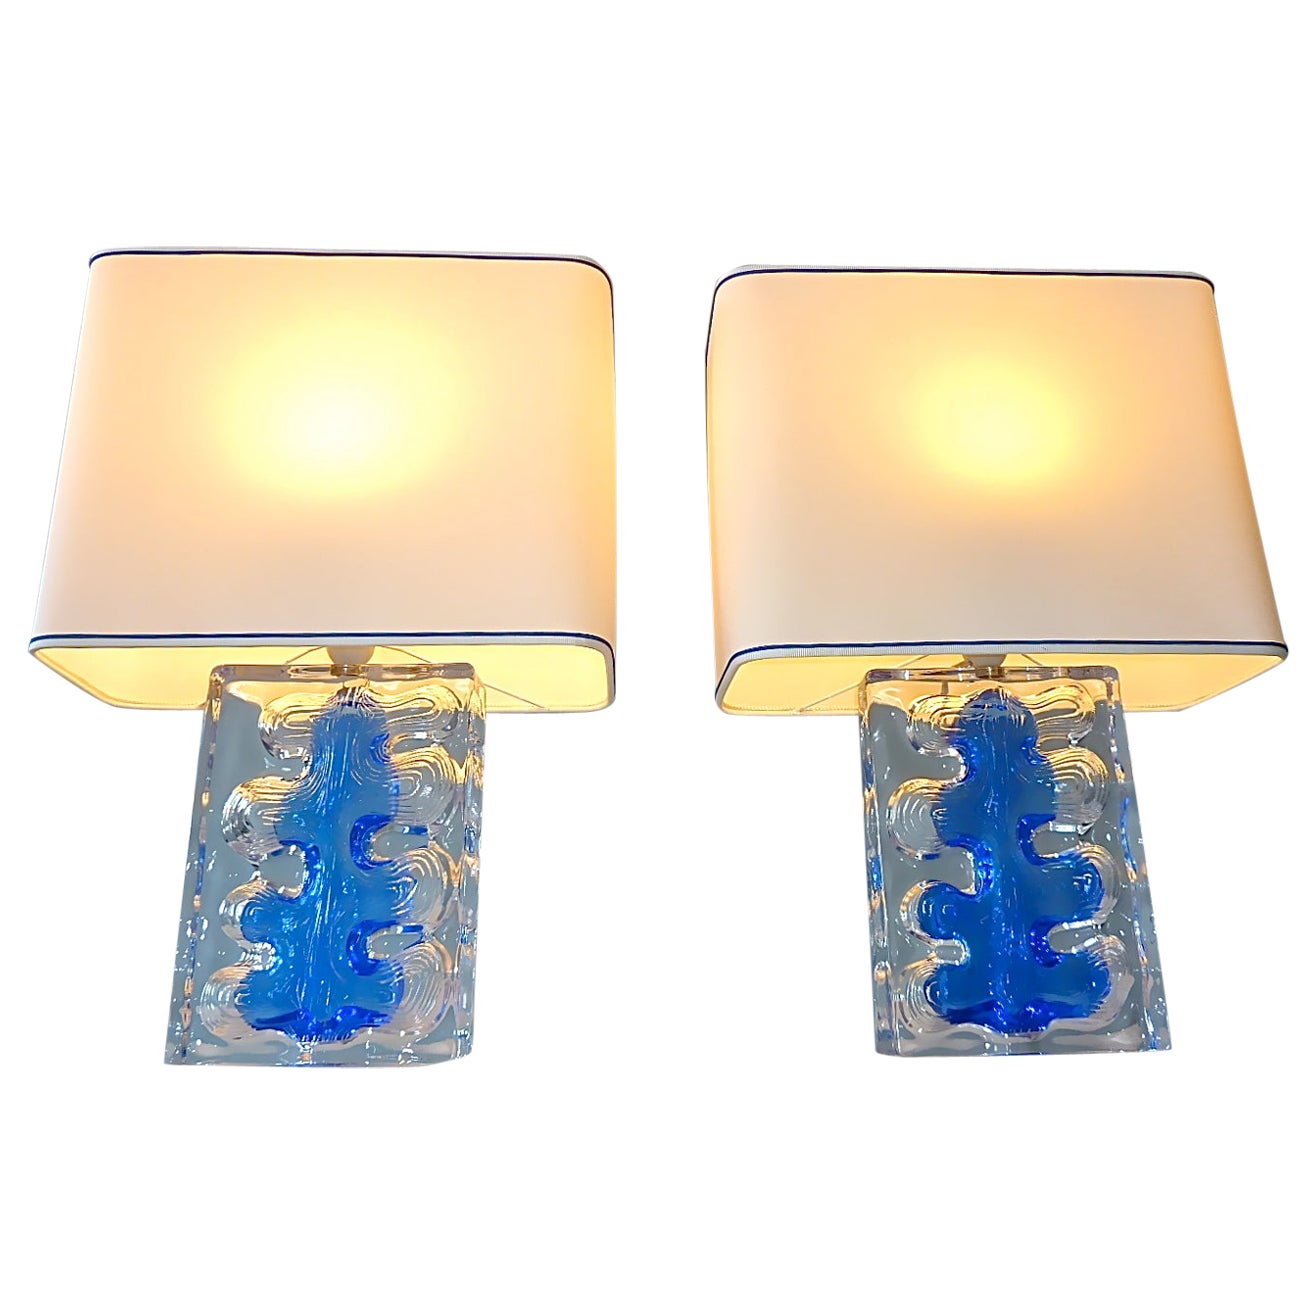 Signed Pair Daum Sculptural Table Lamps Blue Clear Crystal Glass France 1970s